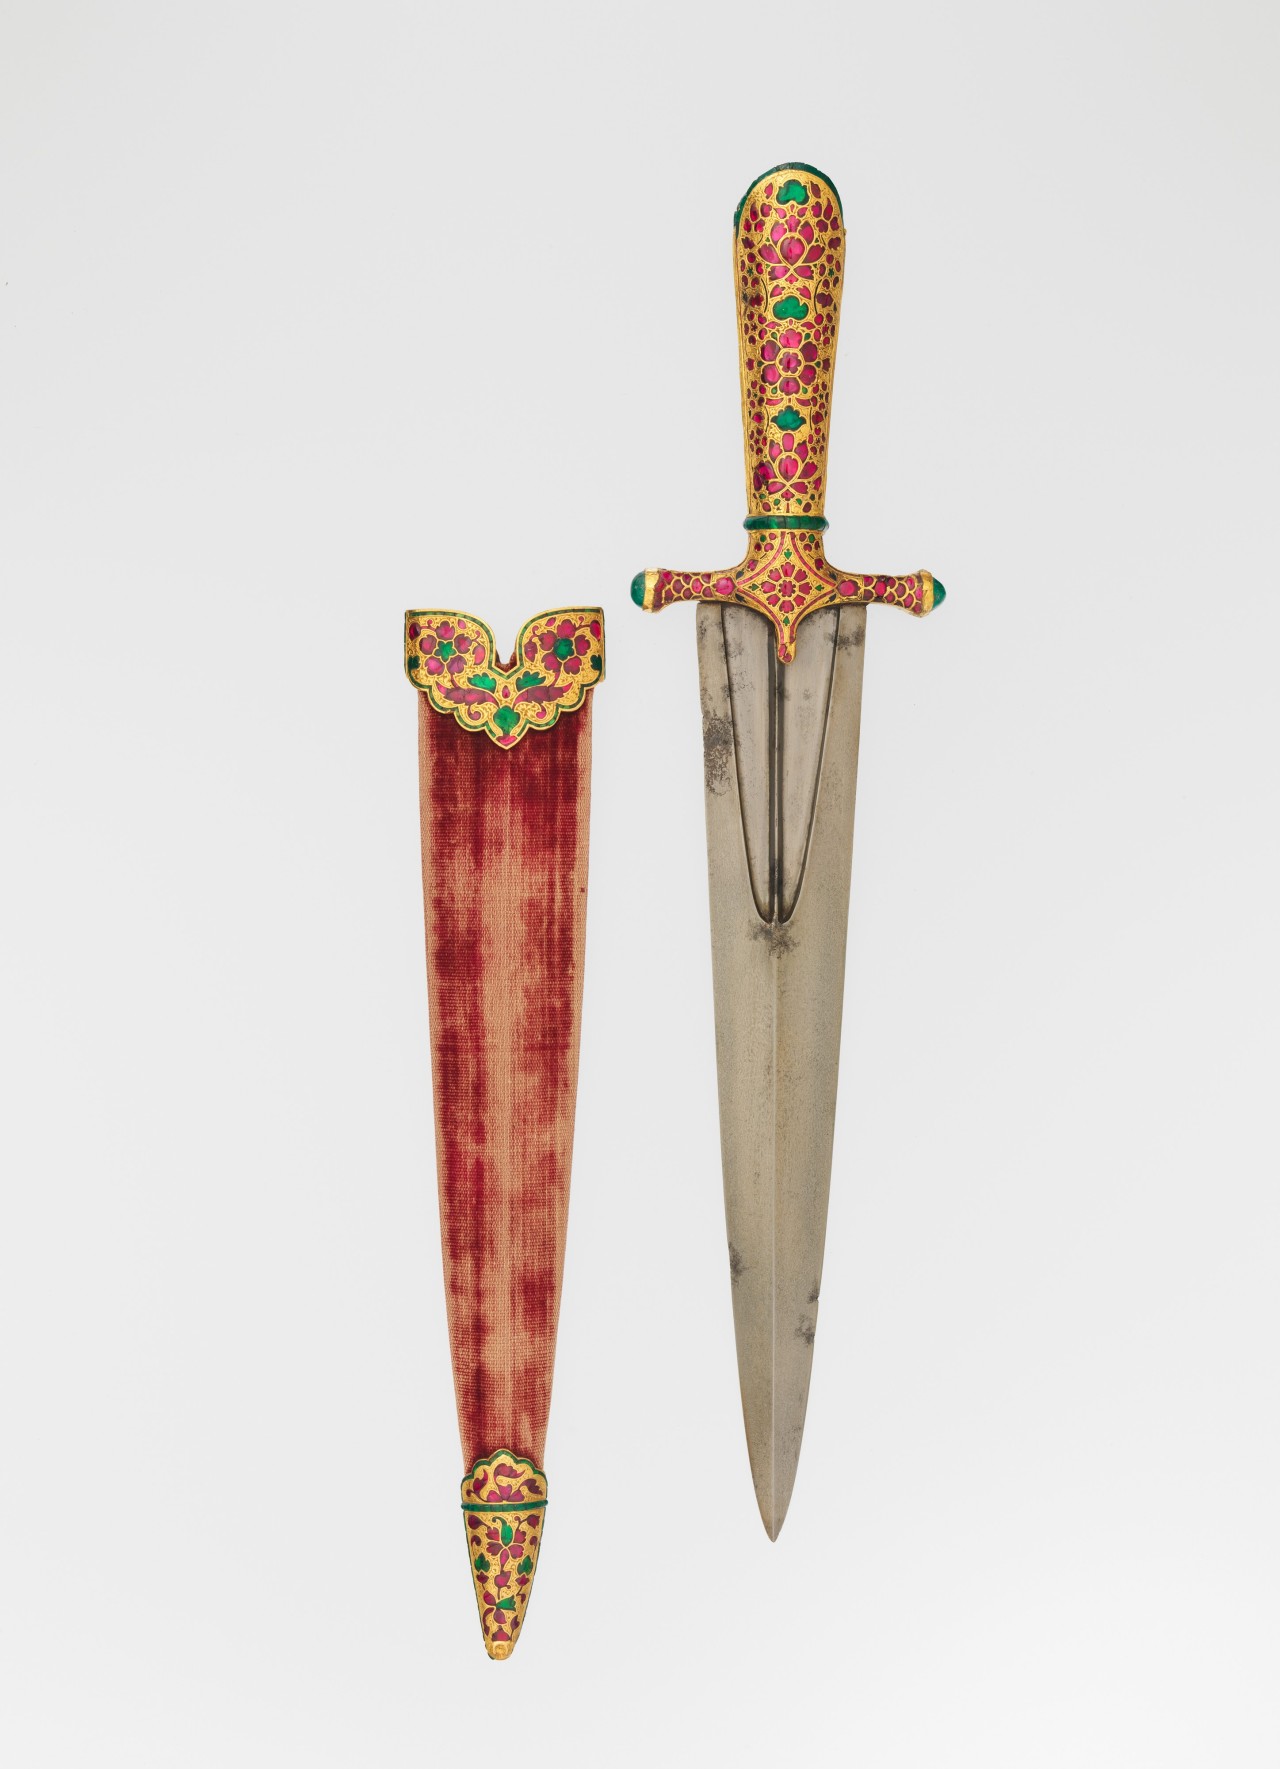 A Mughal Empire Dagger adorned in gold, emeralds and rubies, 1600's India. The Metropolitan Museum of Art.jpg